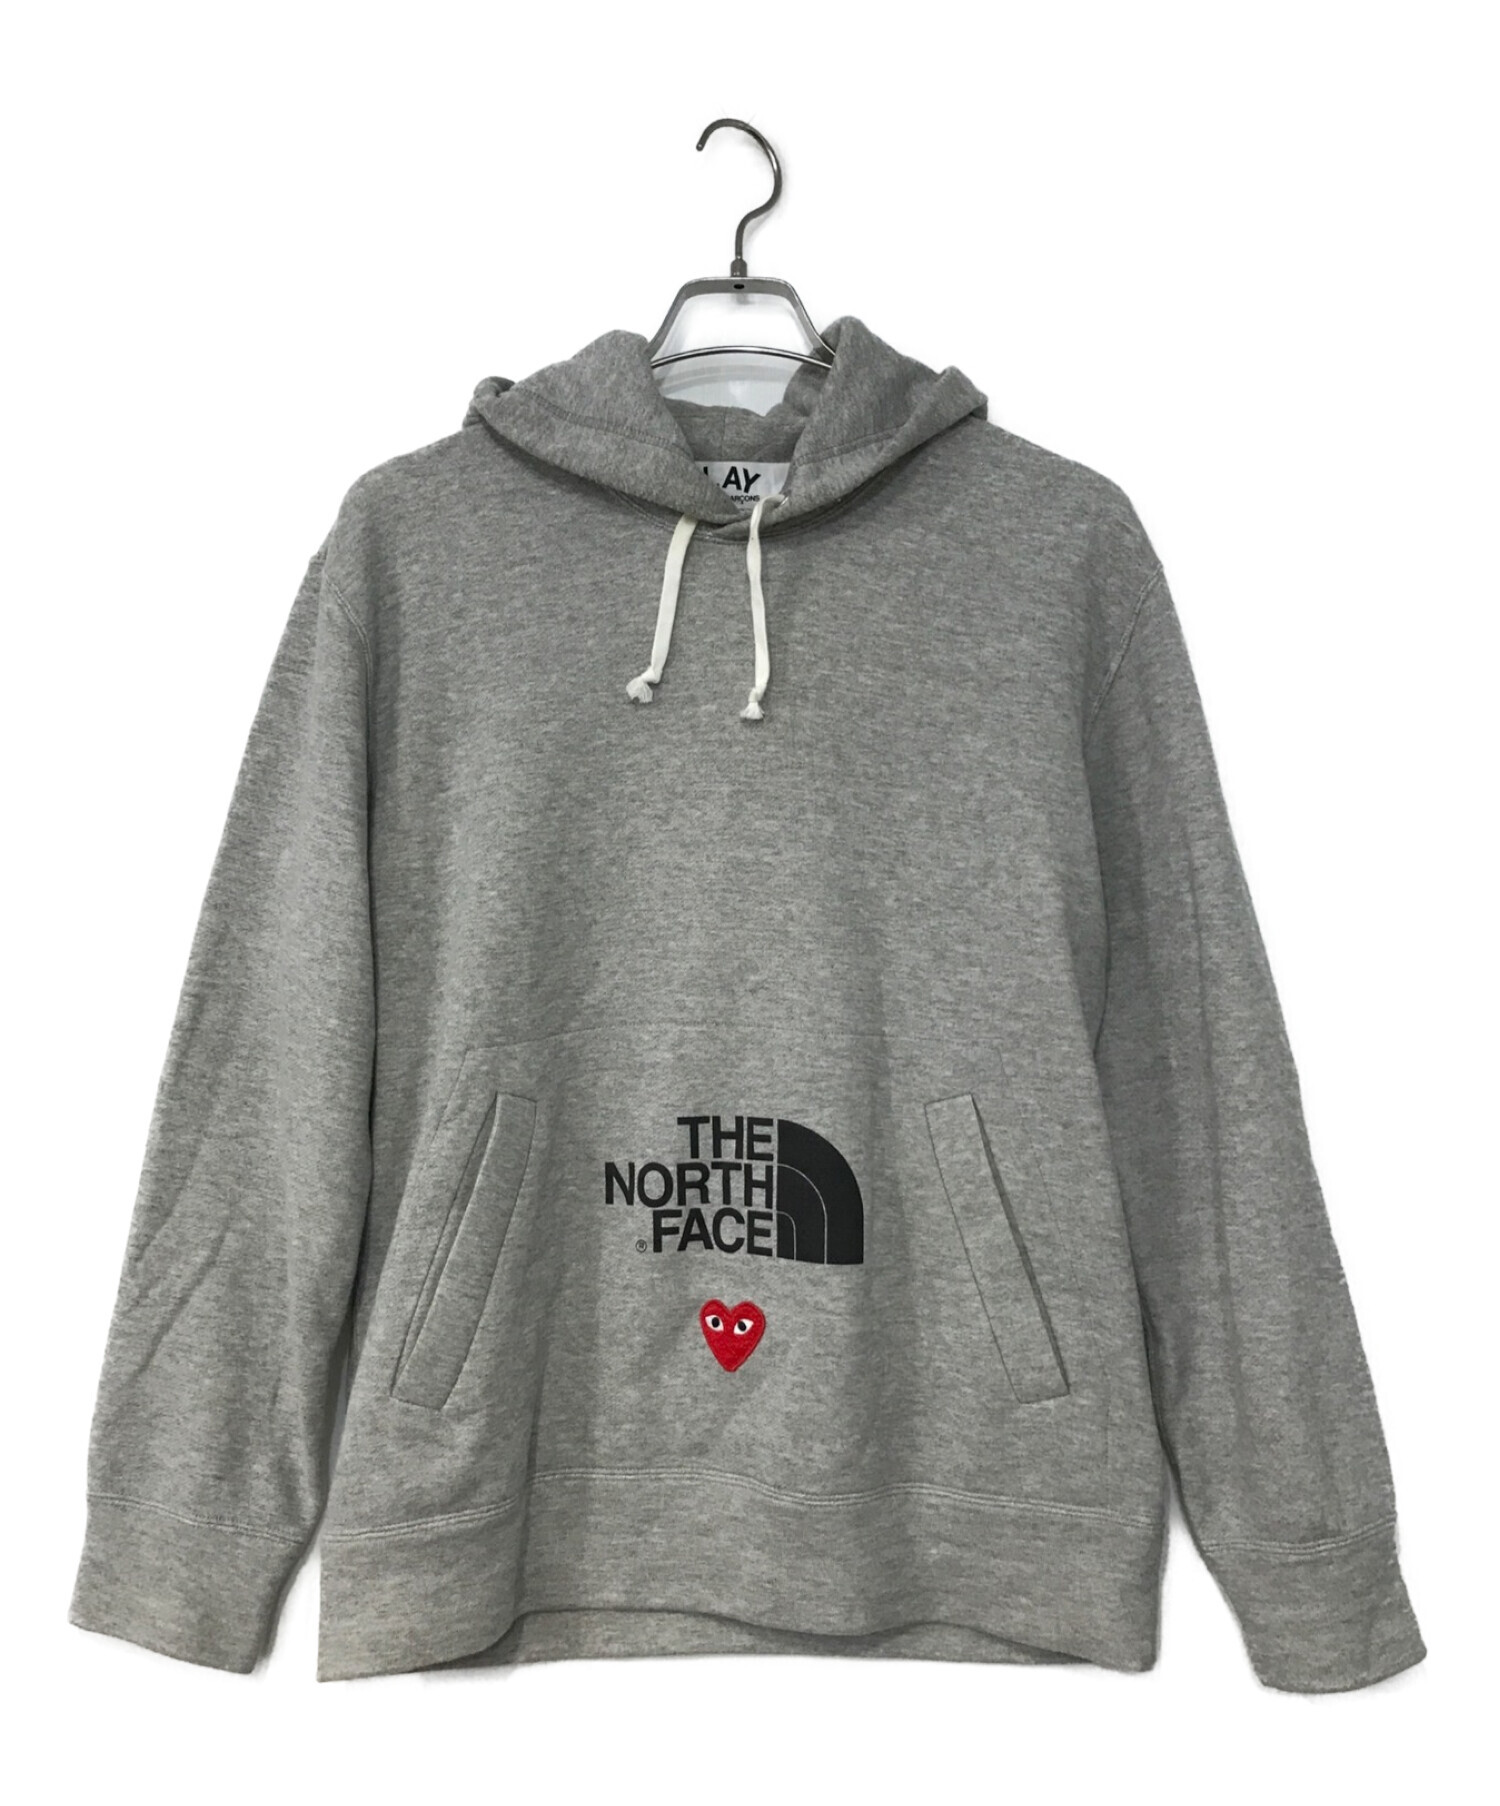 The north face x CDG hoodie